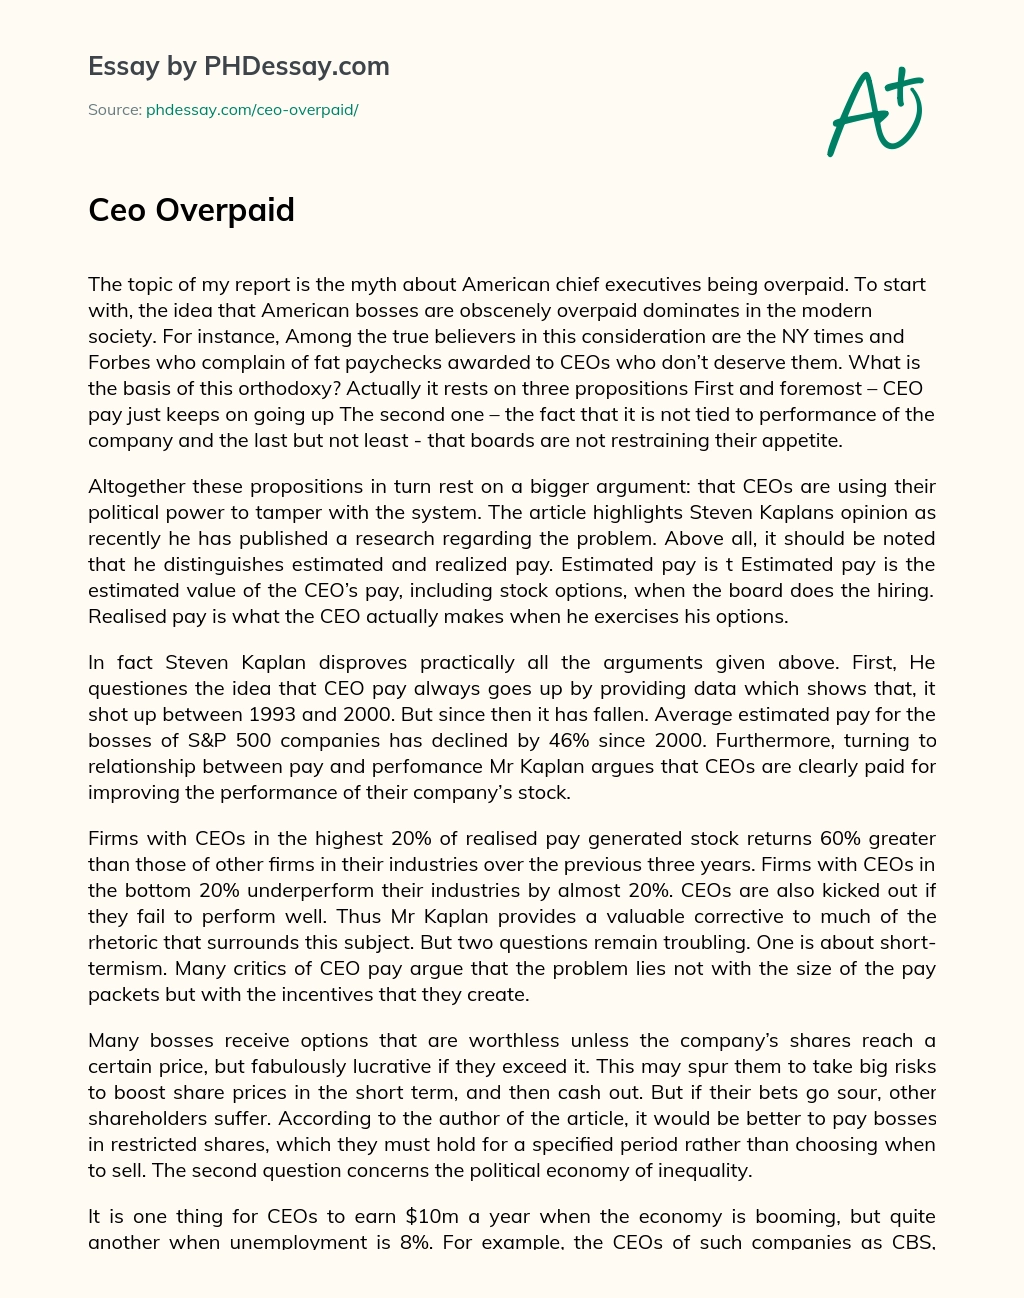 Ceo Overpaid essay